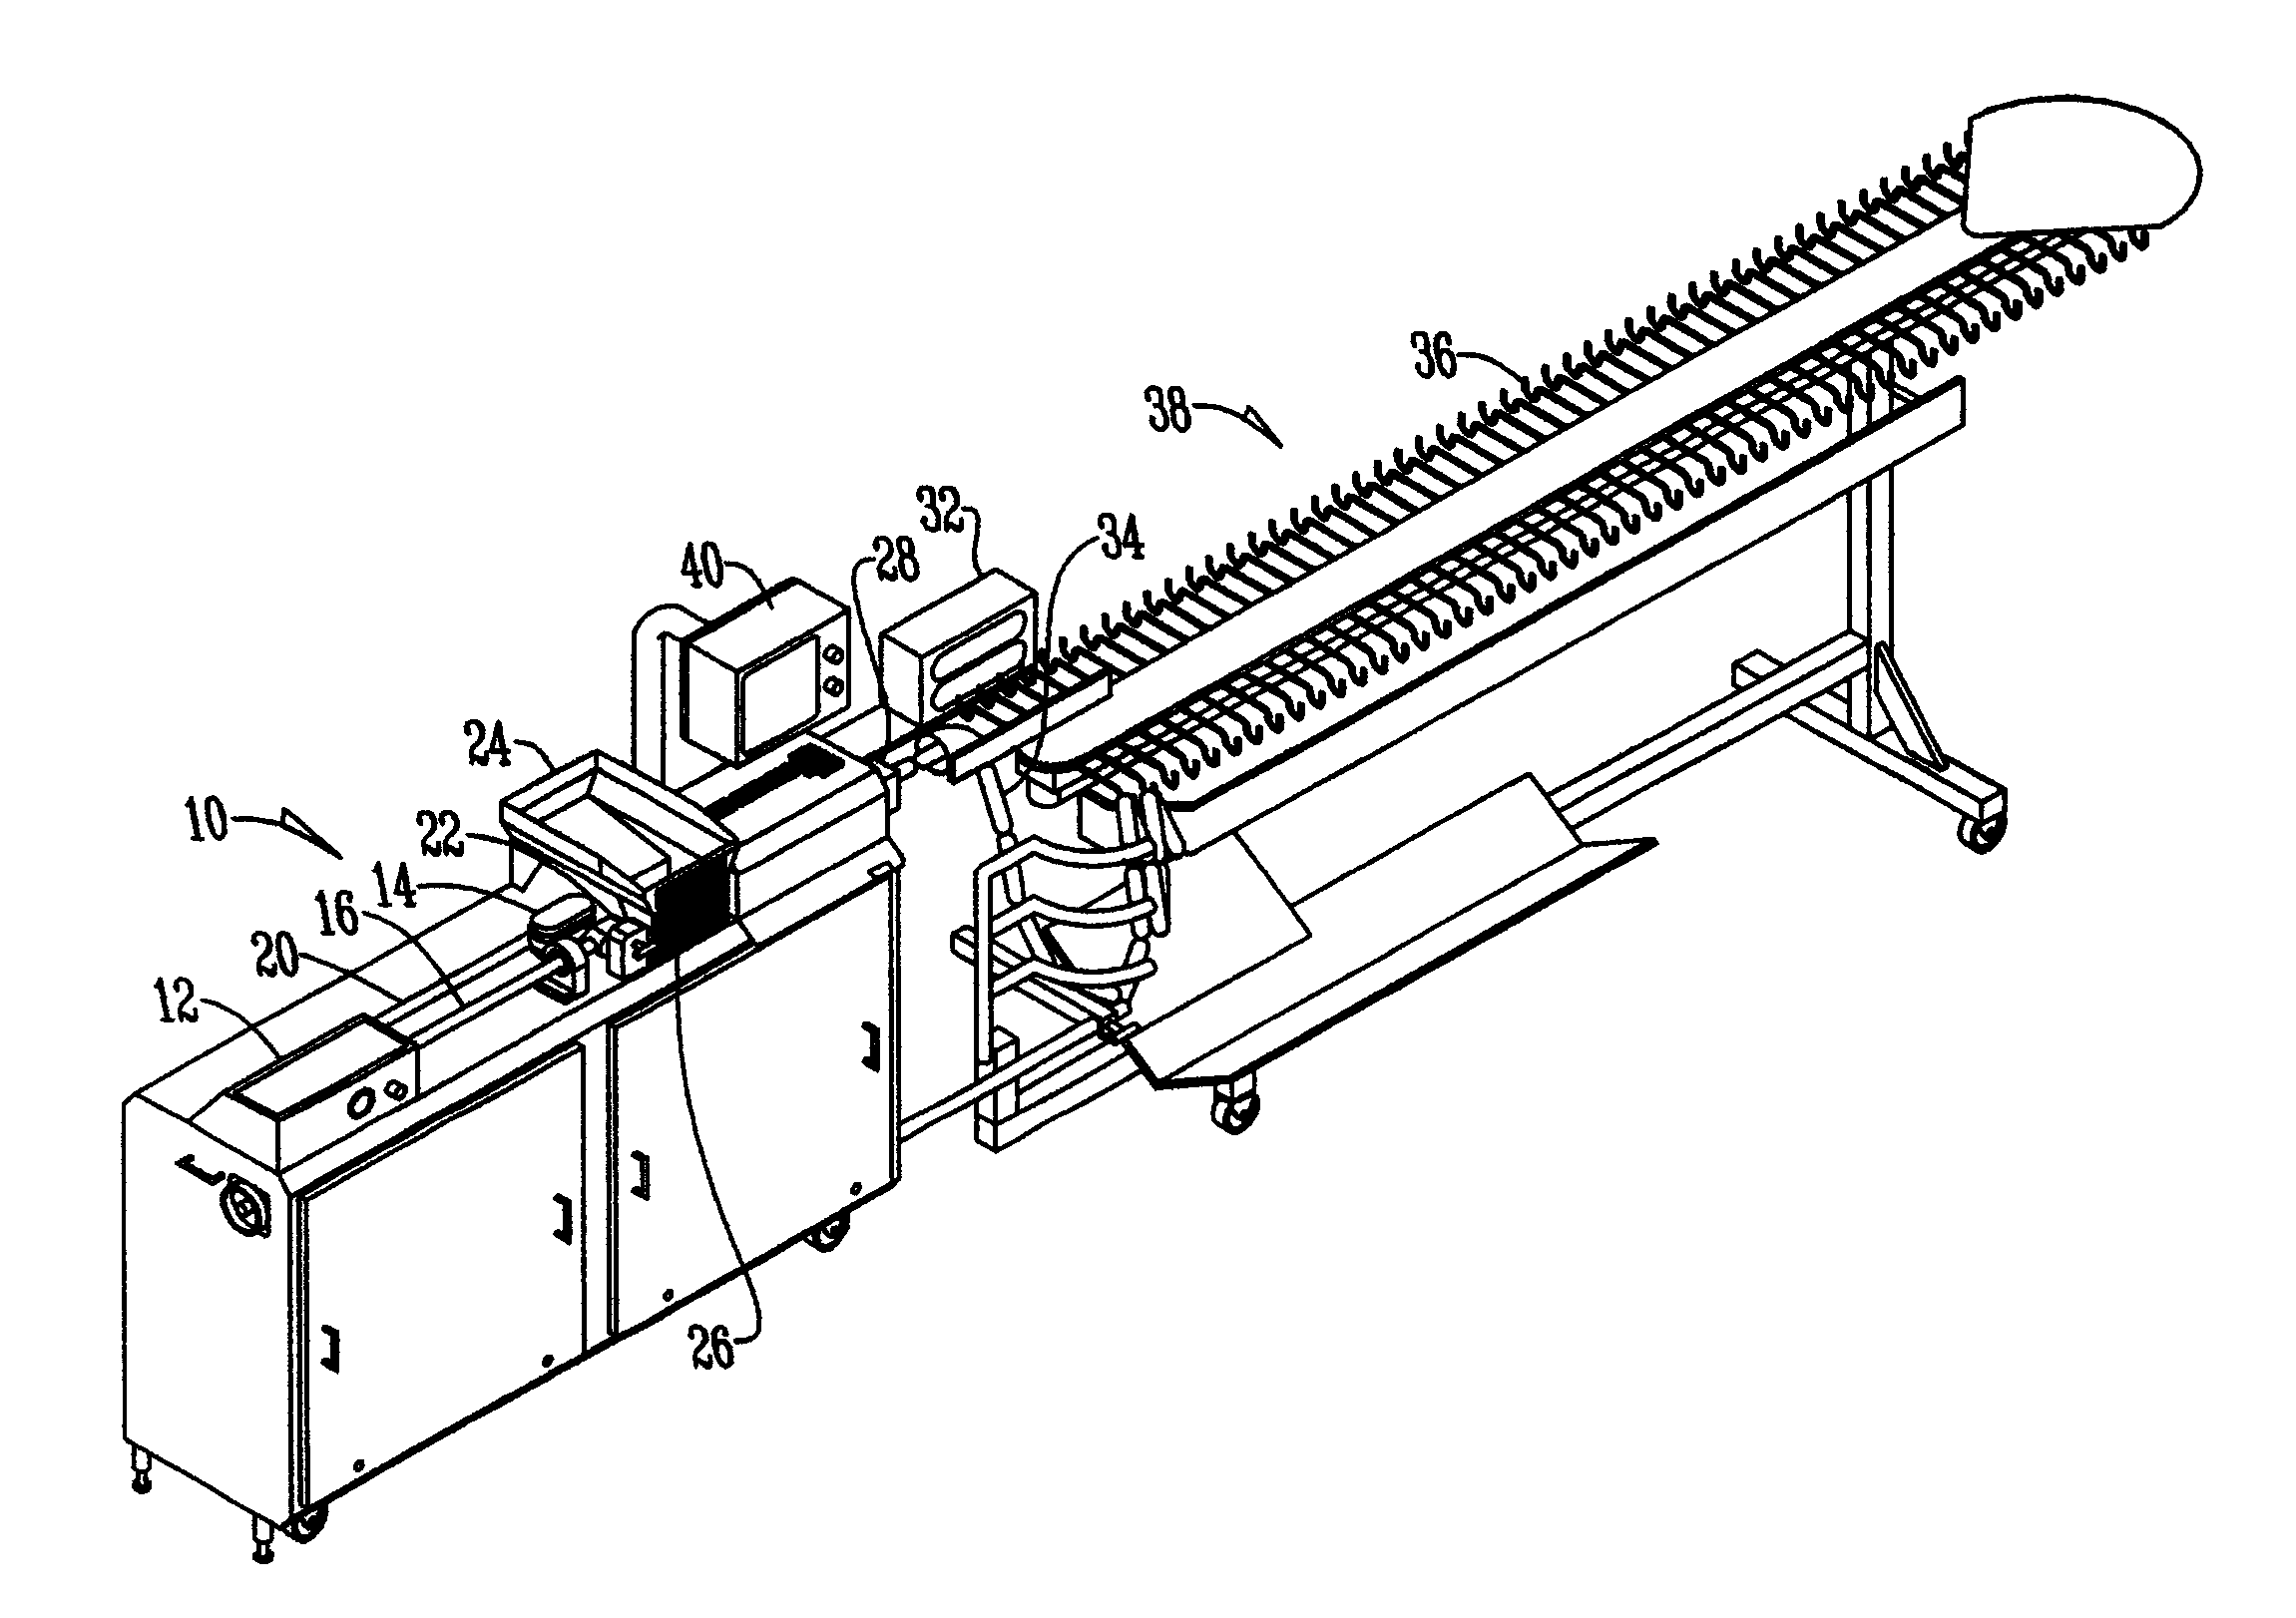 Meat processing assembly